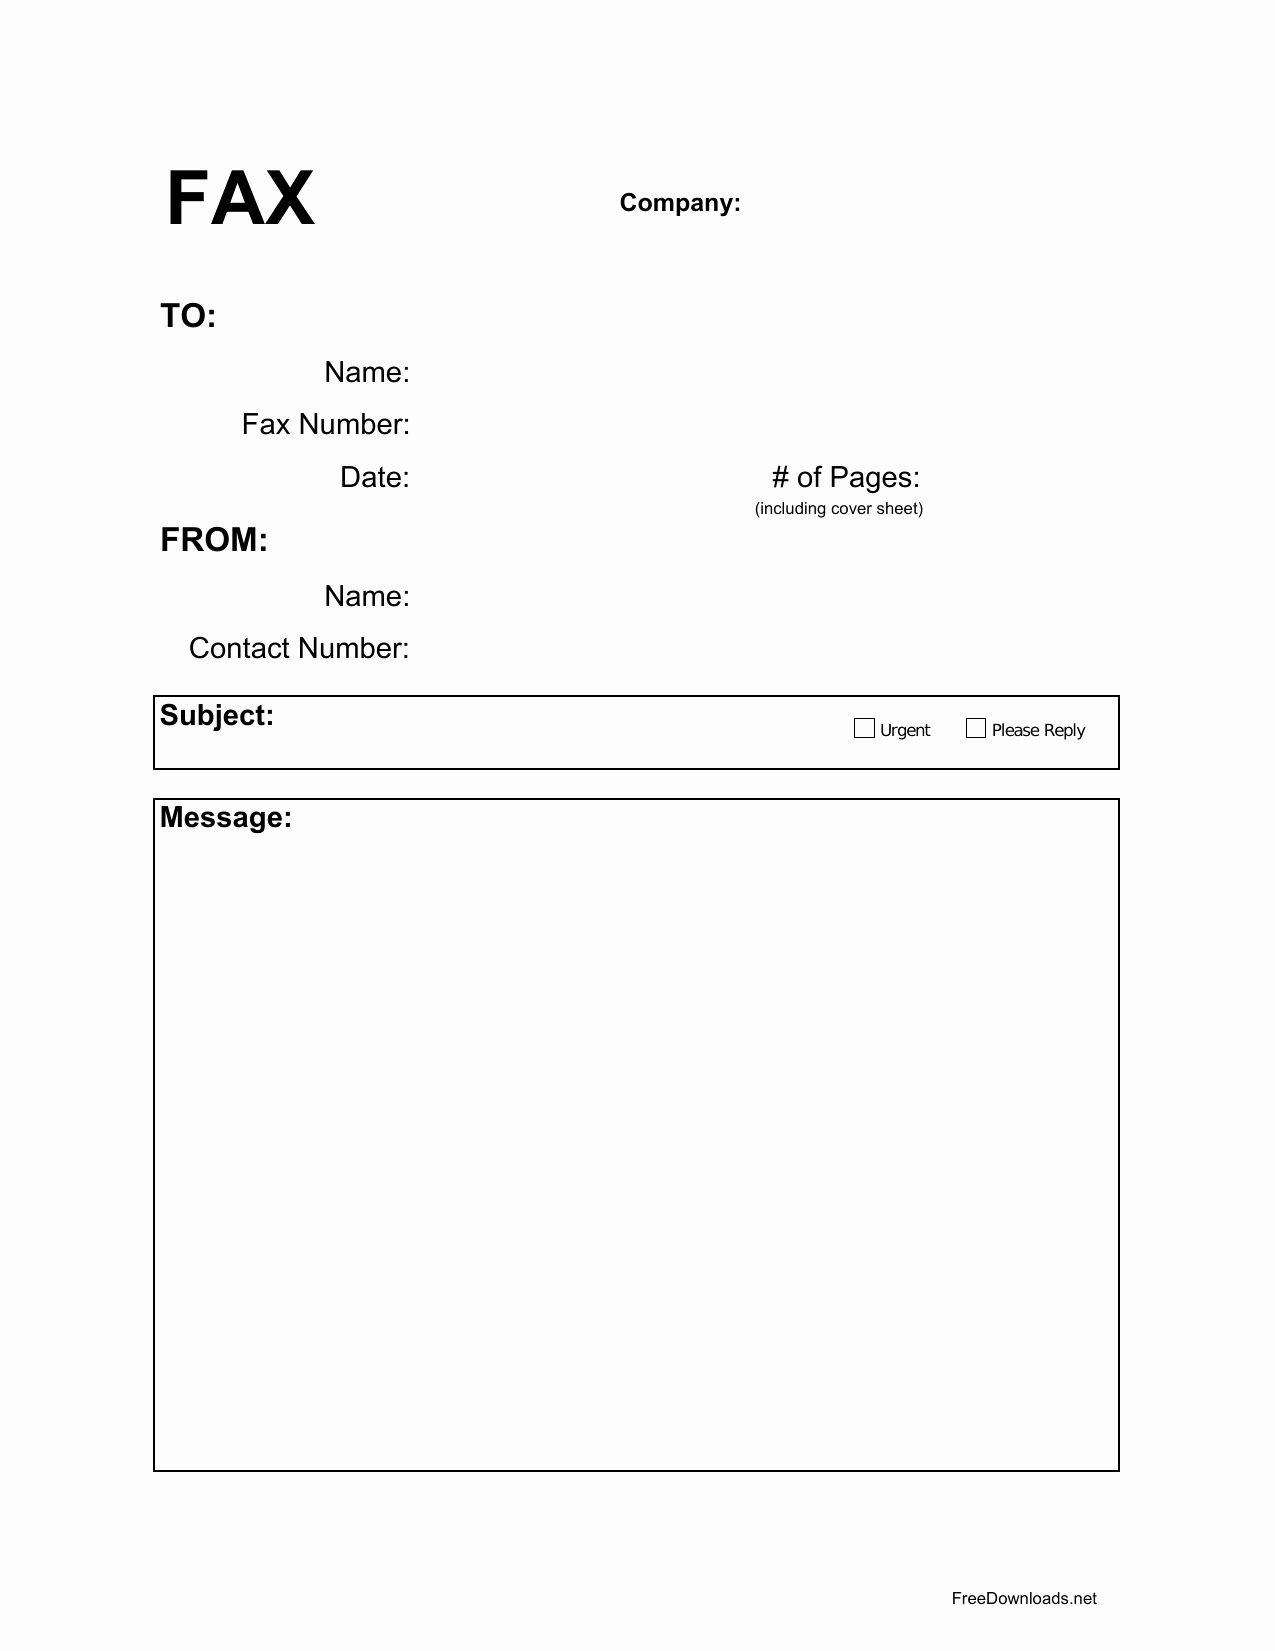 Cover Sheet for Fax Example Fresh Download Fax Cover Sheet Template Pdf Rtf